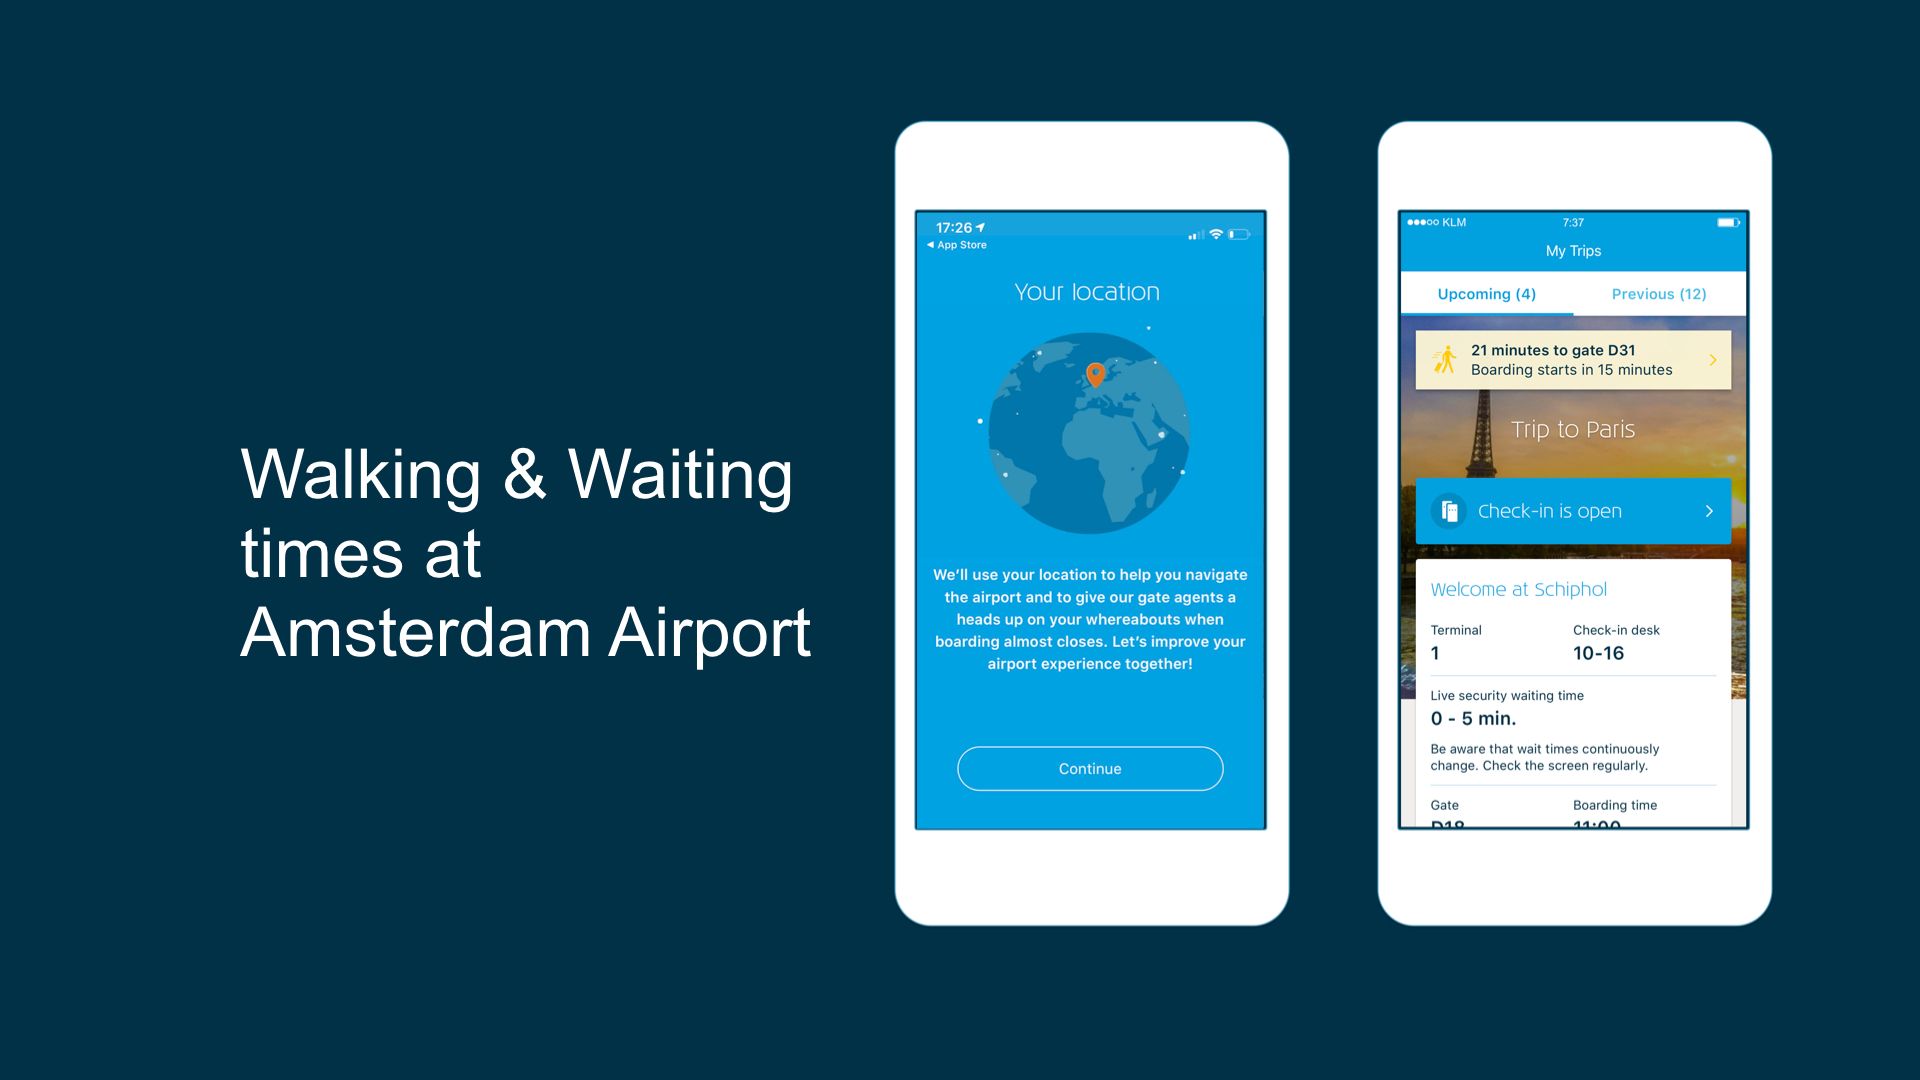 KLM Airlines – Location-Based Services